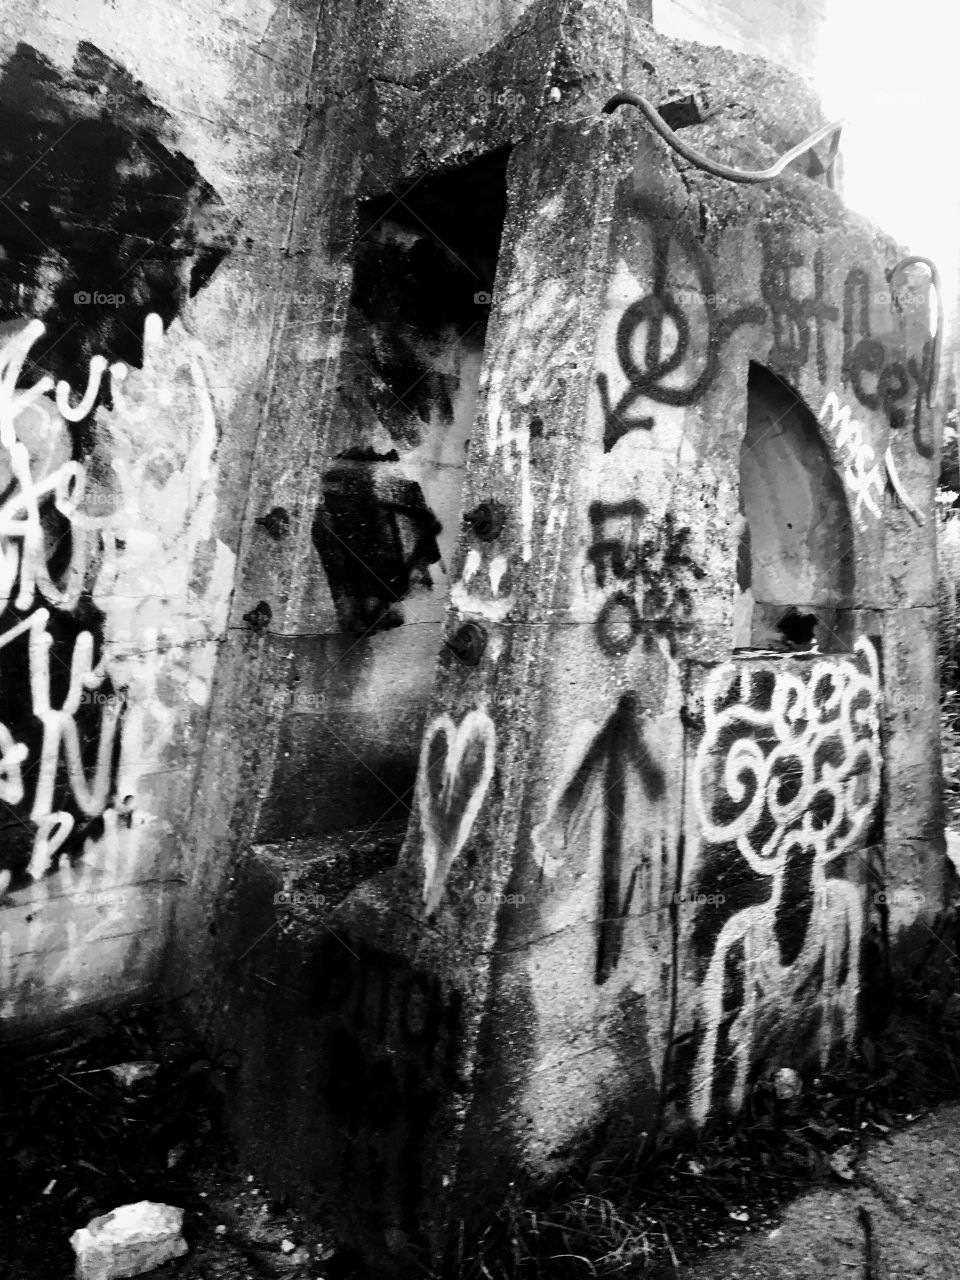 While hiking near lake Ottawa I found this area that had old remains of a building with graffiti on it ... I thought it looked amazing!!!  